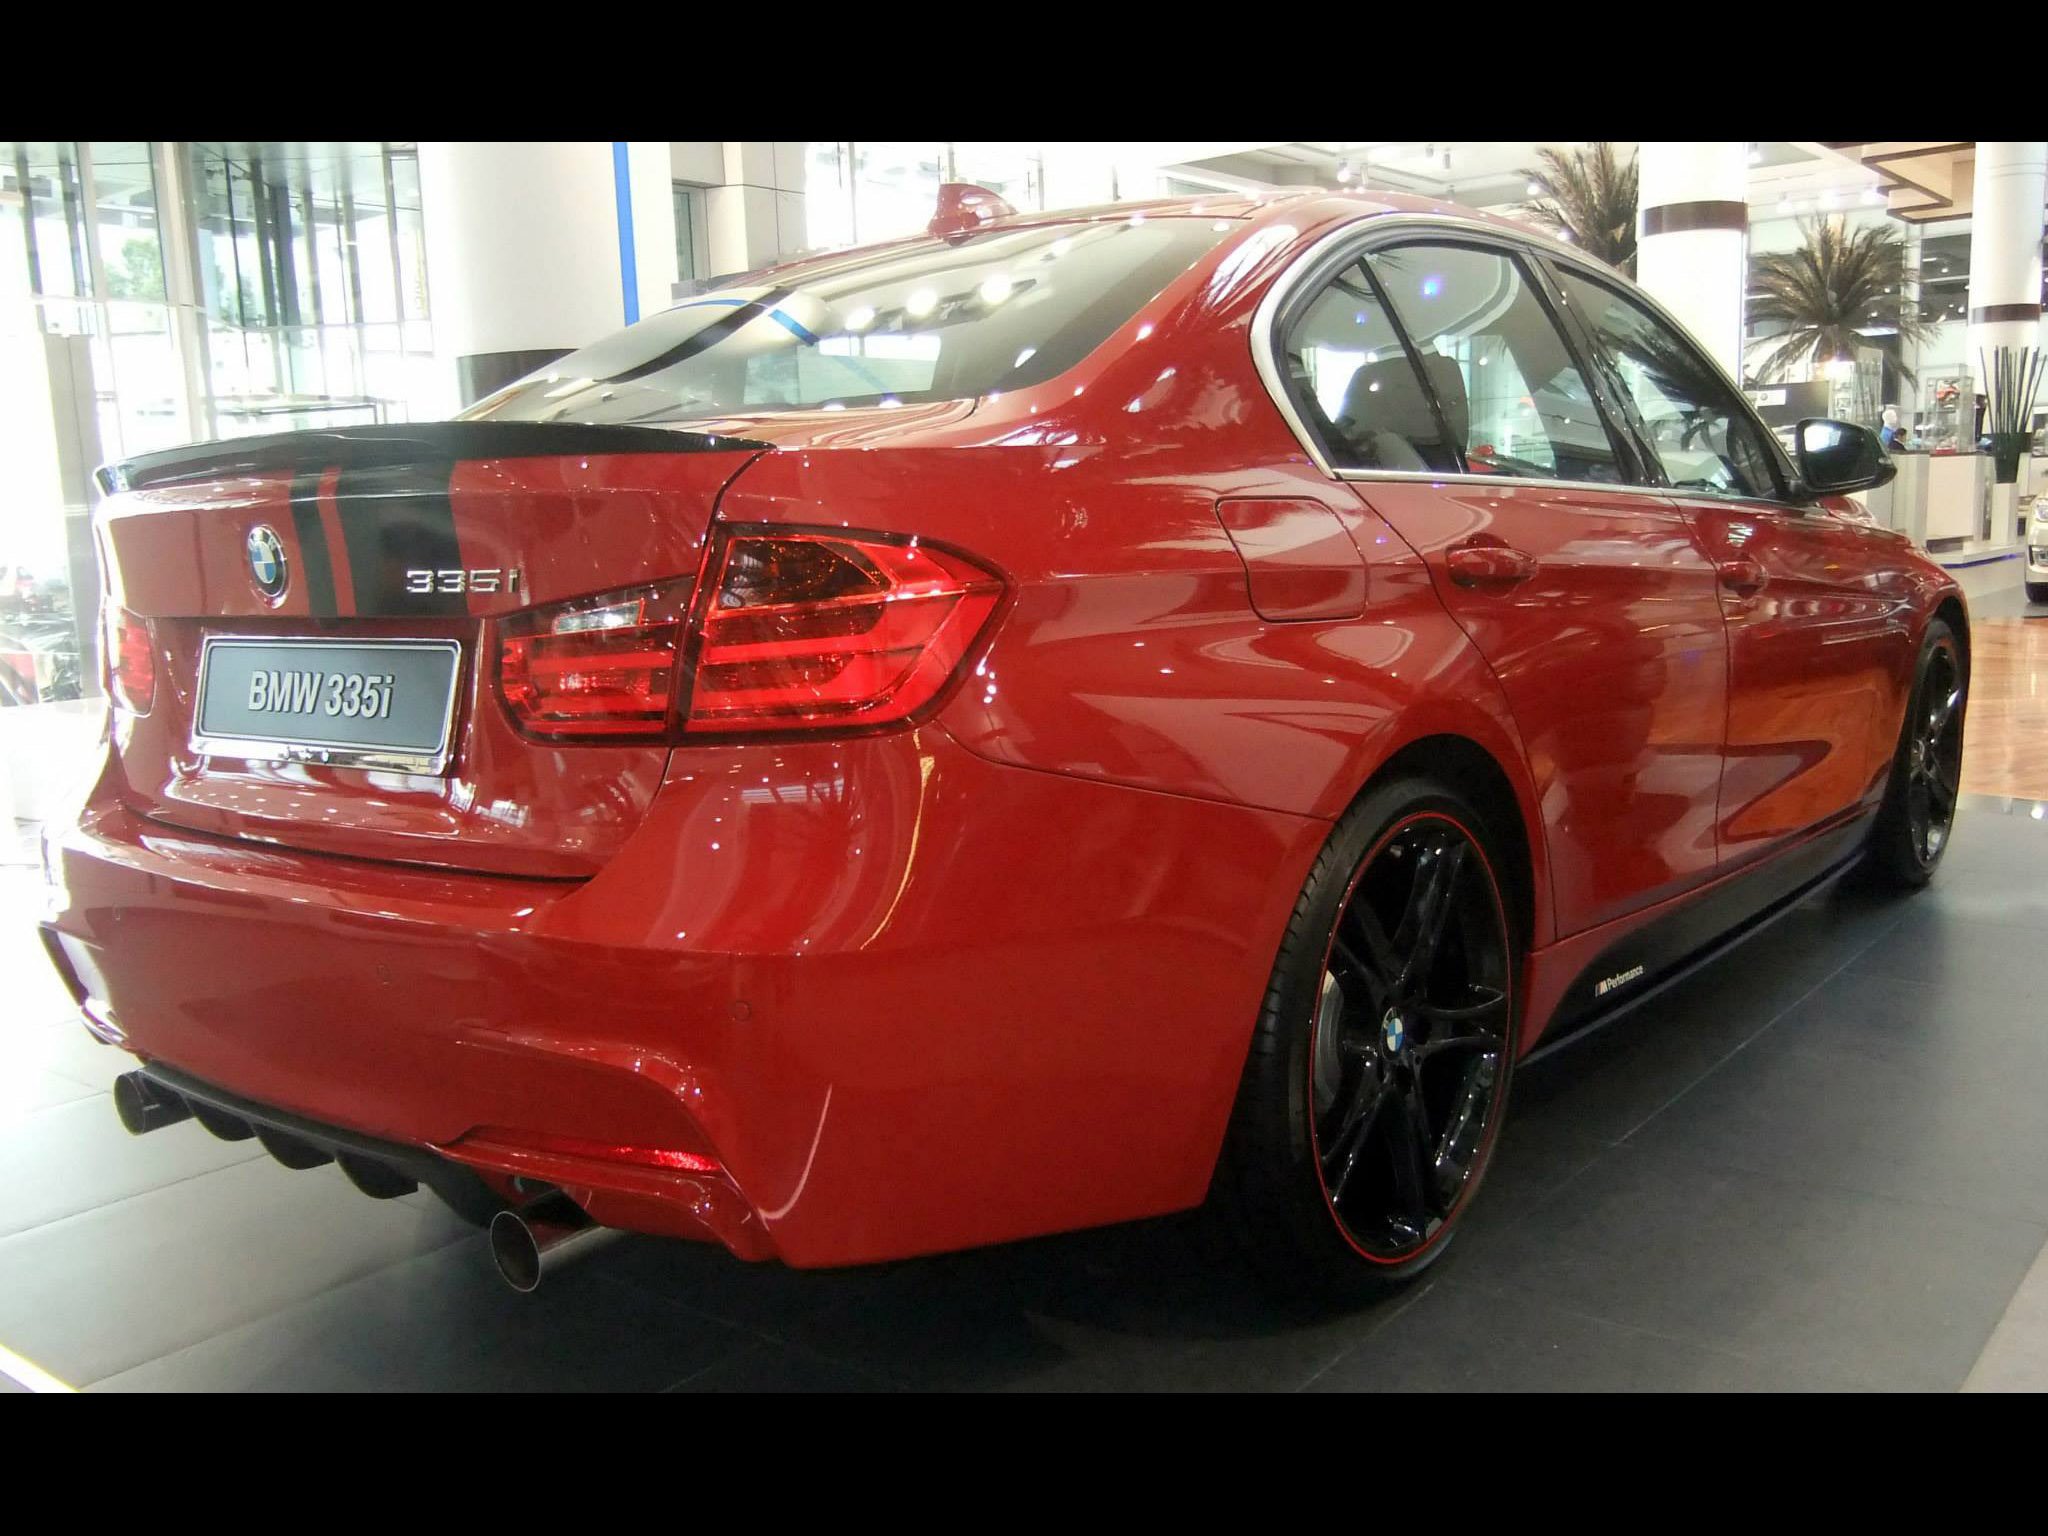 2014 Bmw 3 Series 335i M Performance Abu Dhabi F30 Tuning Wallpapers Hd Desktop And Mobile Backgrounds